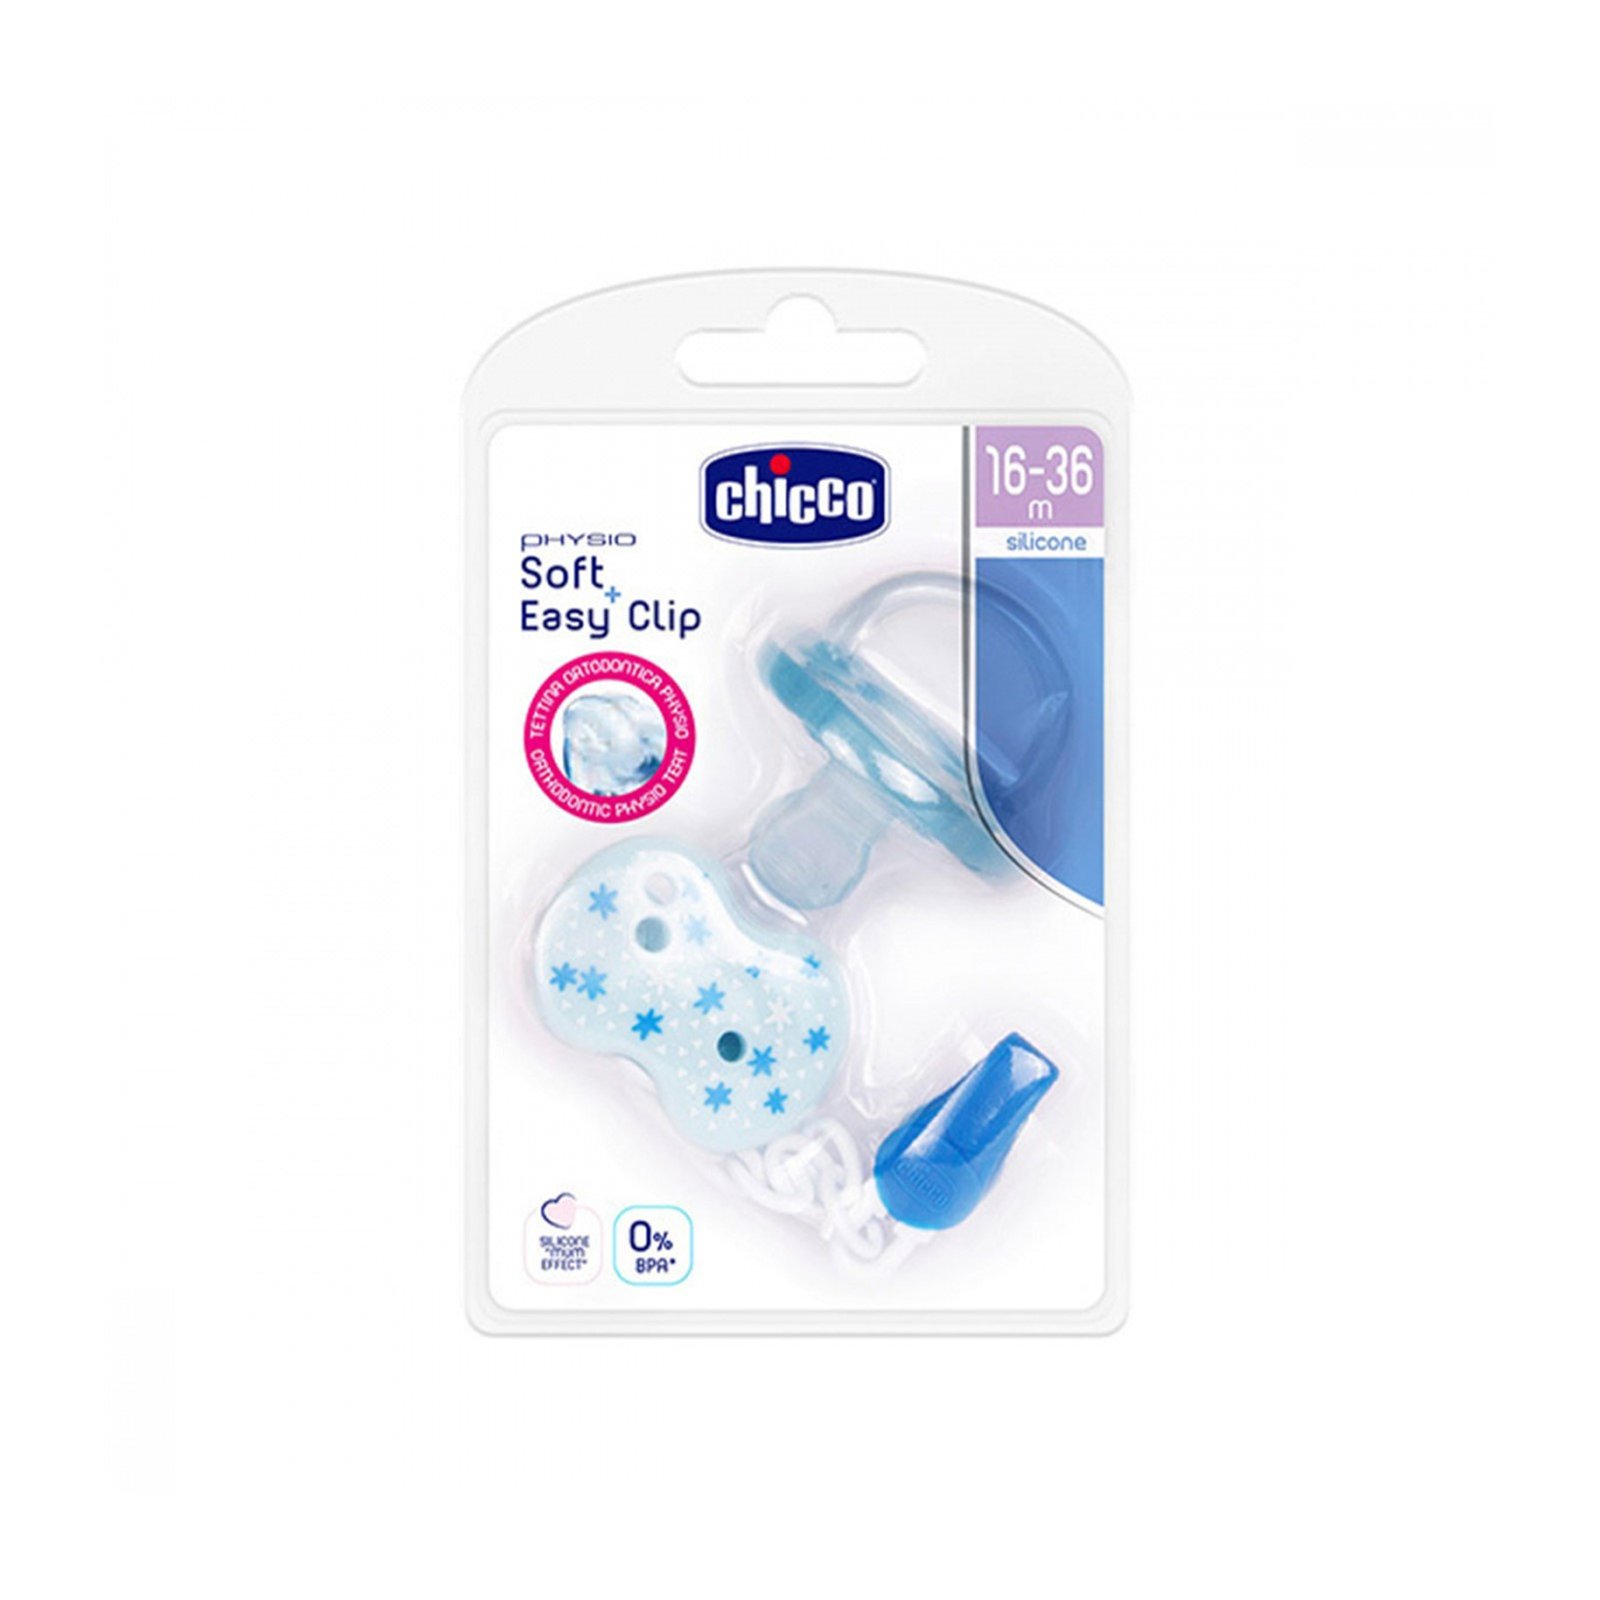 Chicco Physio Soft Silicone Pacifier + Easy Clip 16-36m Blue